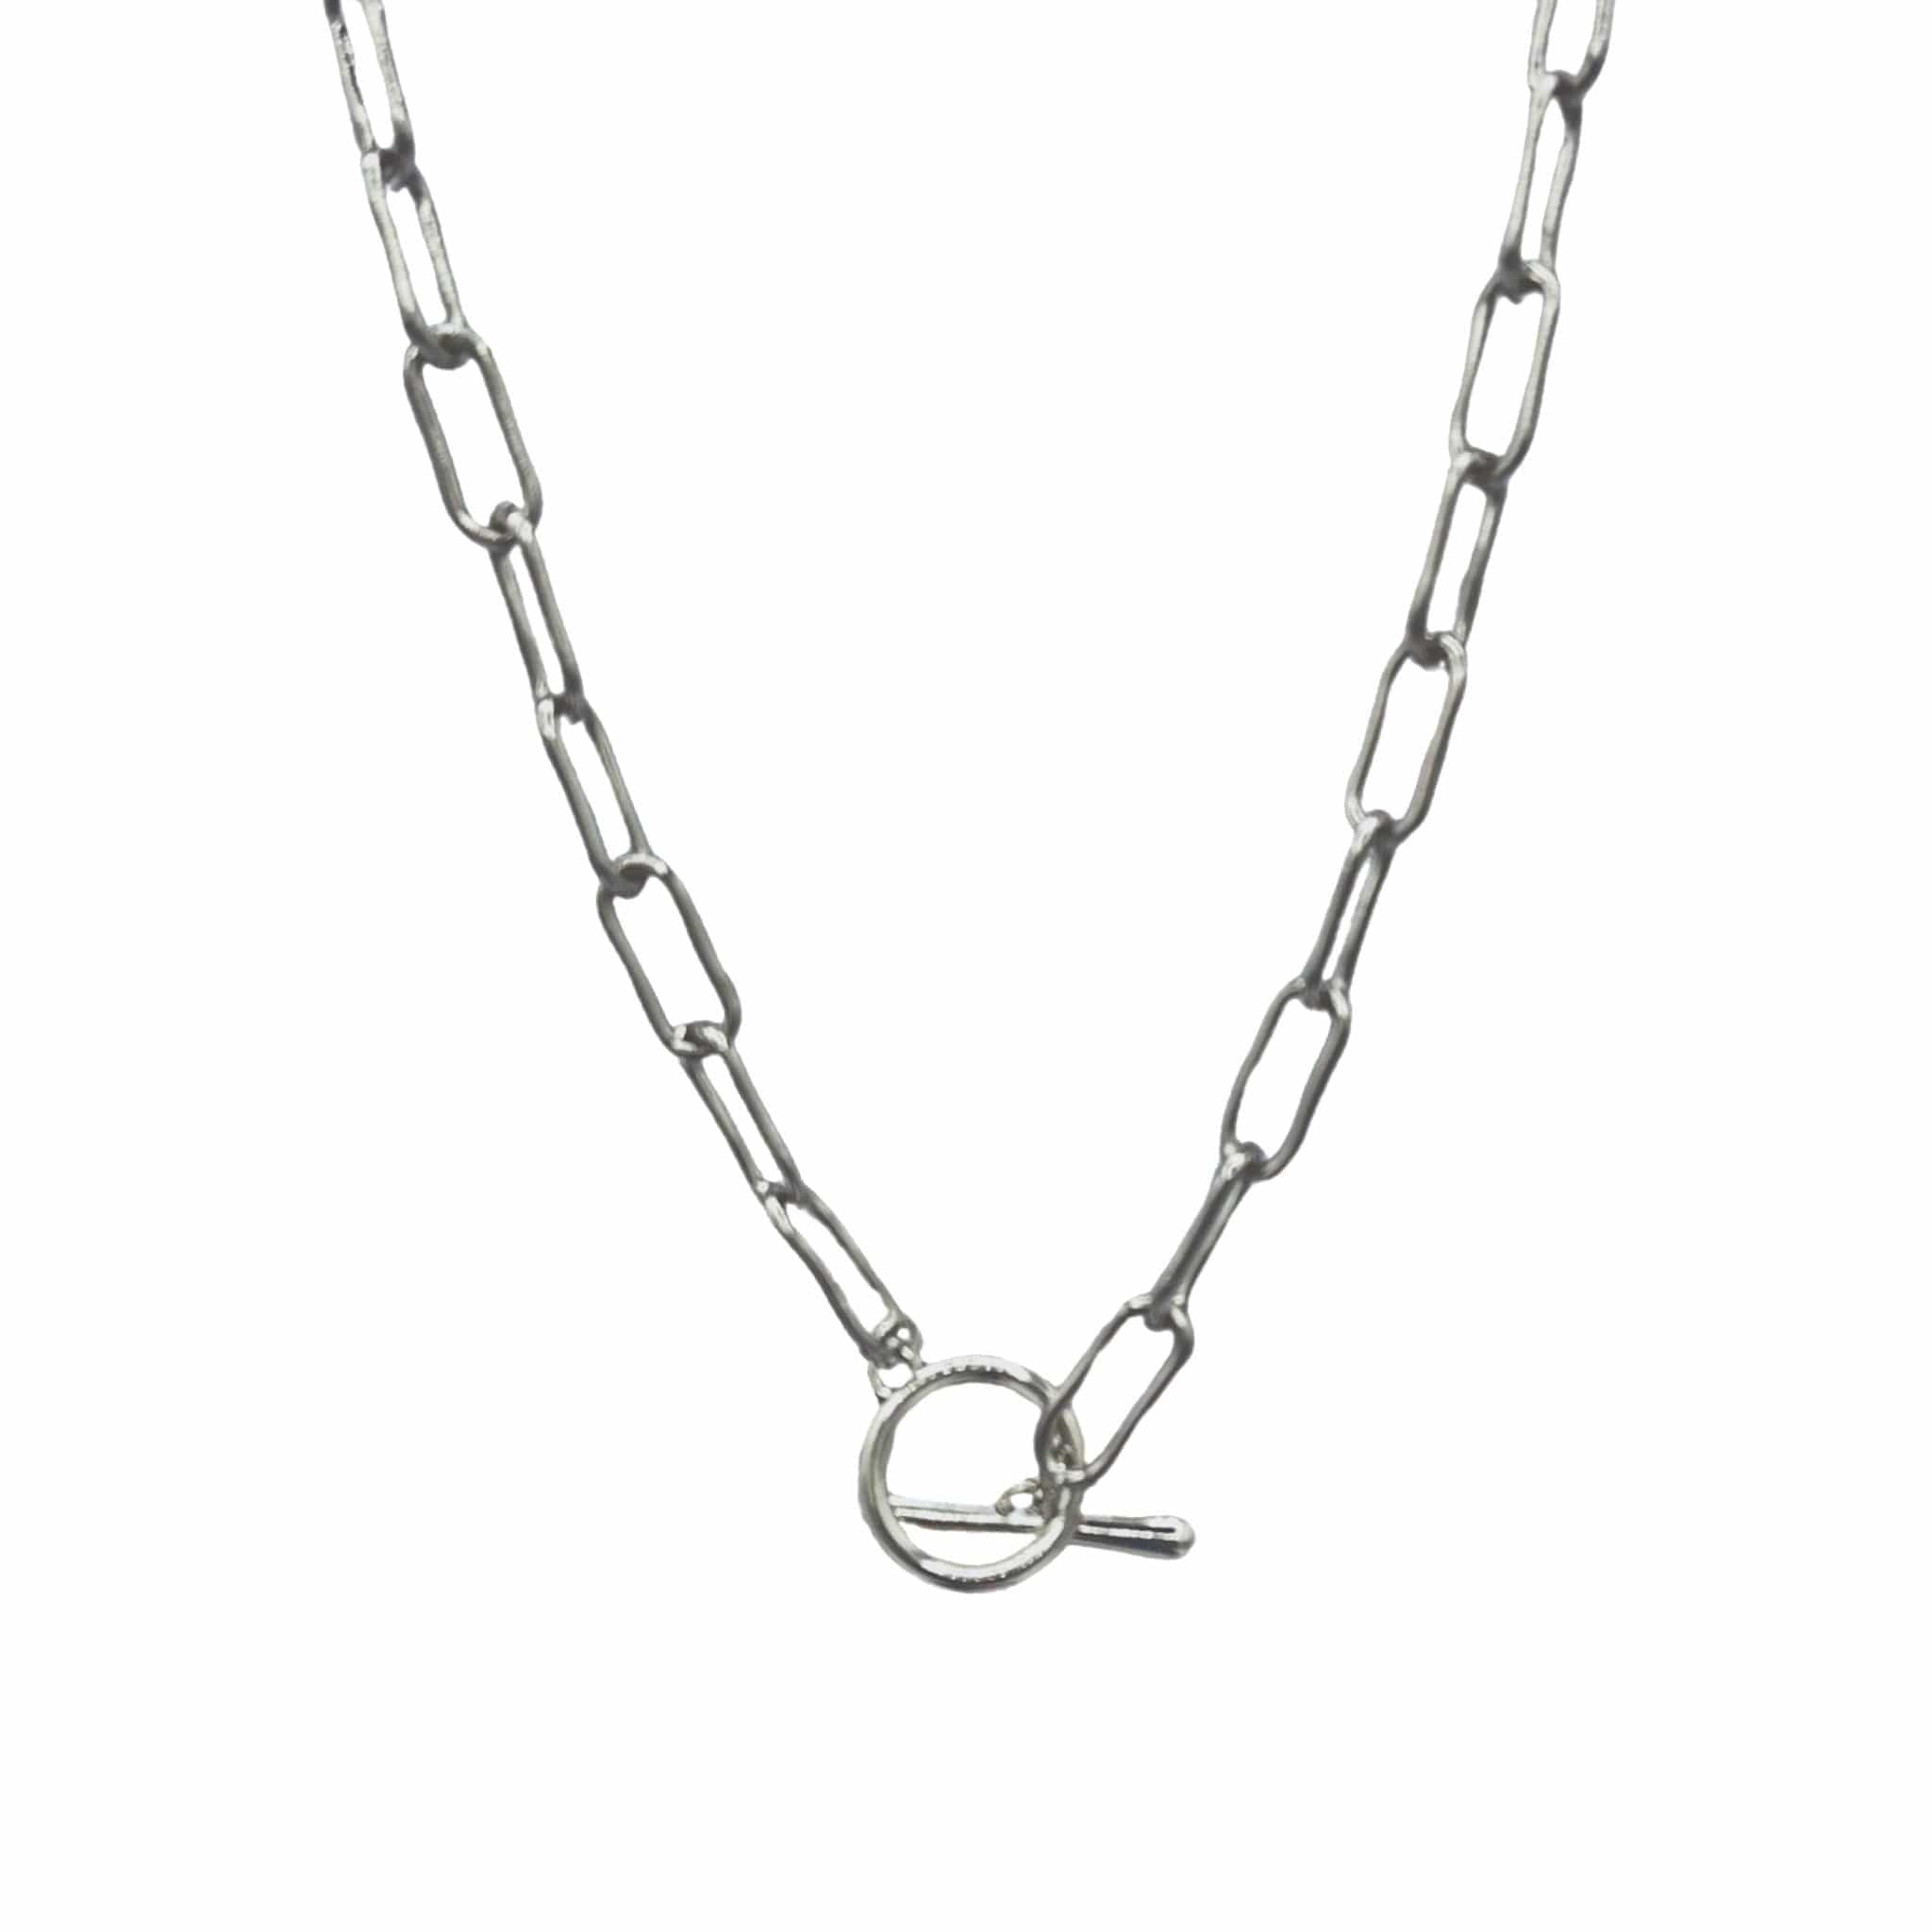 Minprice Minprice® High Quality Stainless Steel 8 mm Thick Necklace Chain  for Men and Boy Silver Plated Stainless Steel Chain Price in India - Buy  Minprice Minprice® High Quality Stainless Steel 8